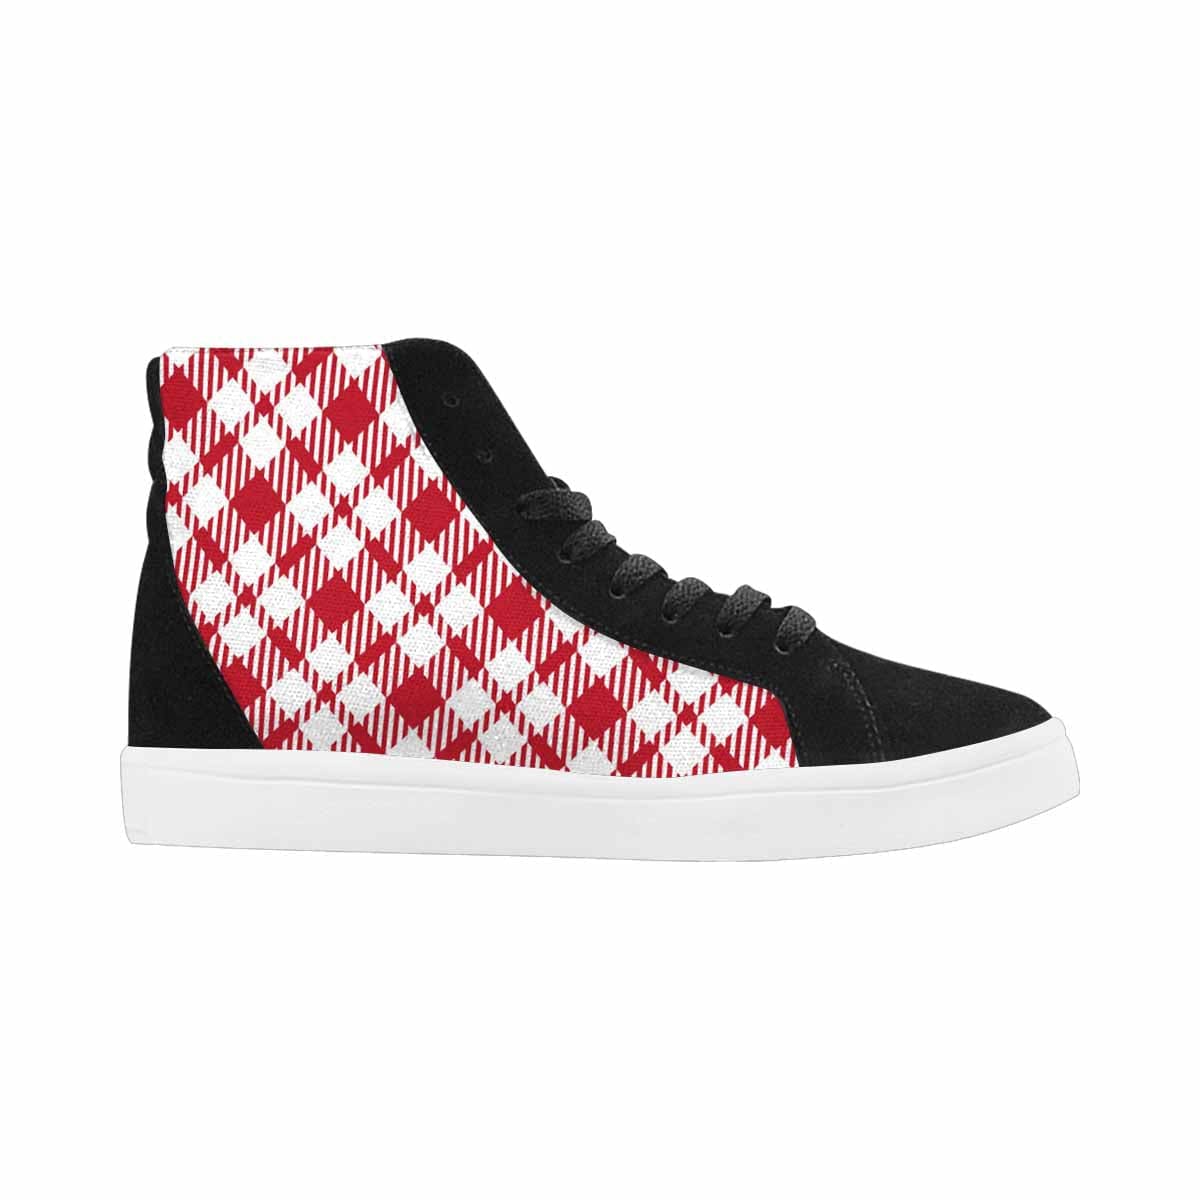 Sneakers For Women, Buffalo Plaid Red And White - High Top Sports Shoes-0